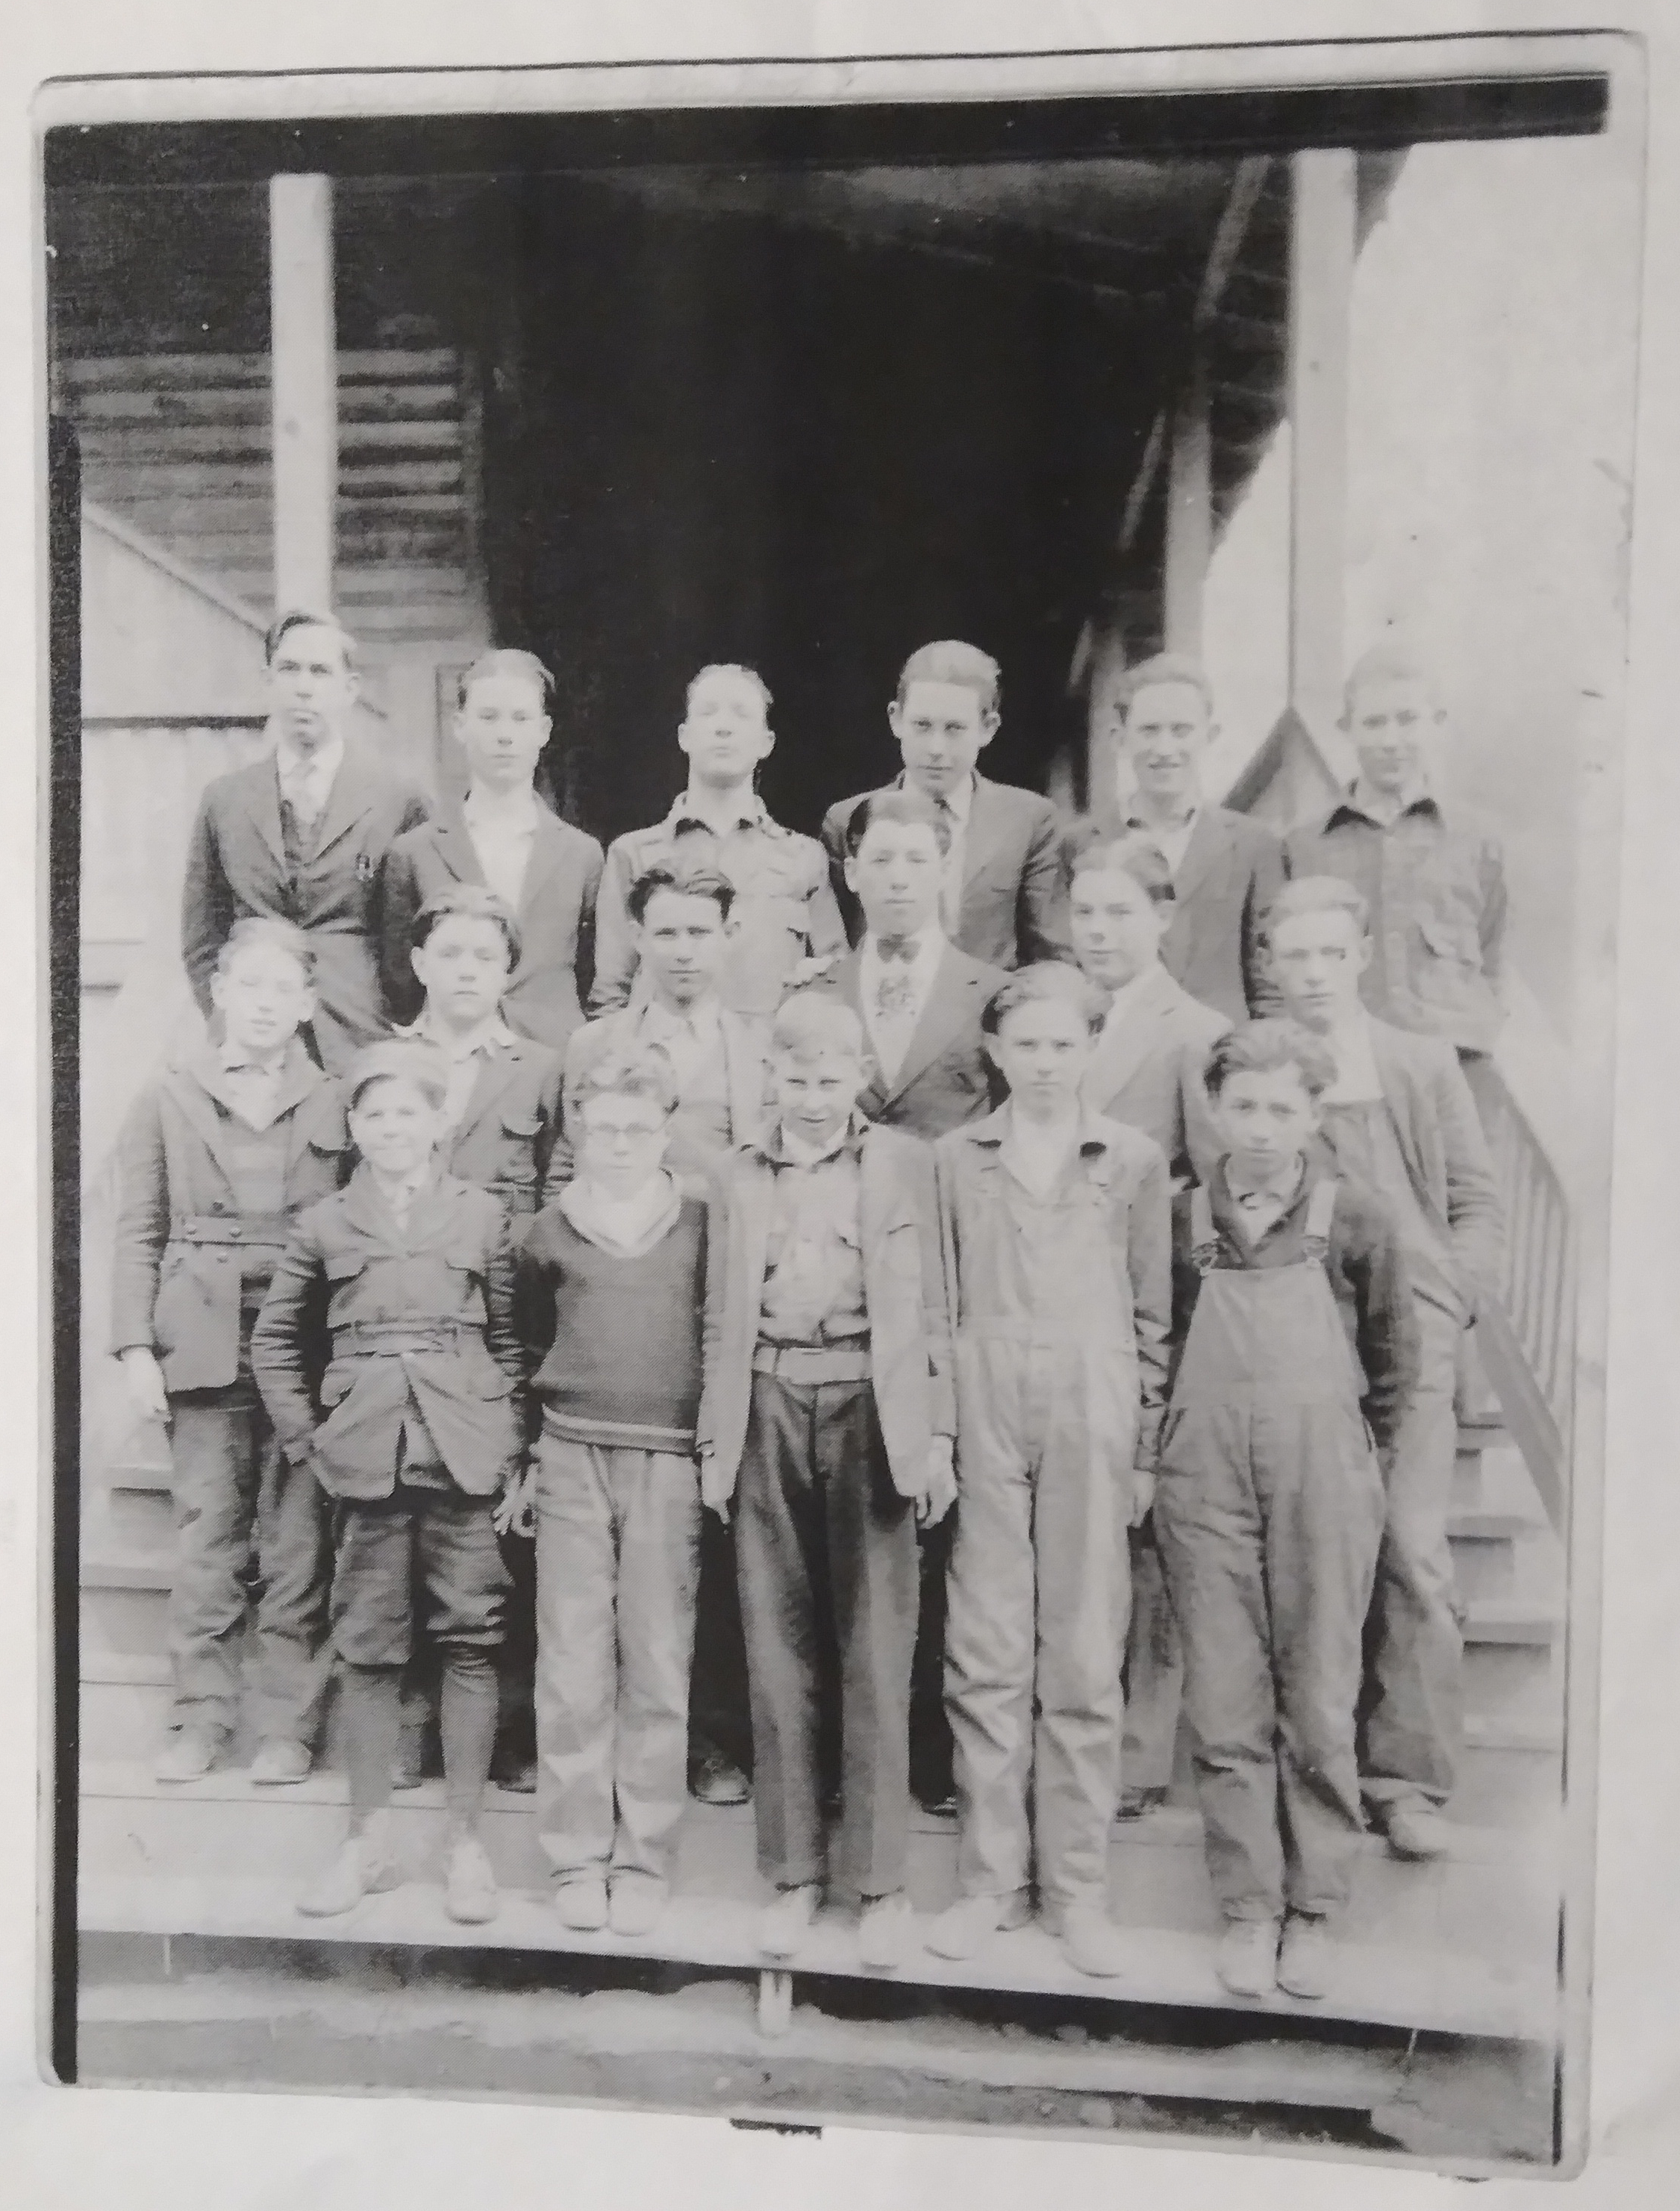 Class photo with my grandfather Percy Reeves in the center.